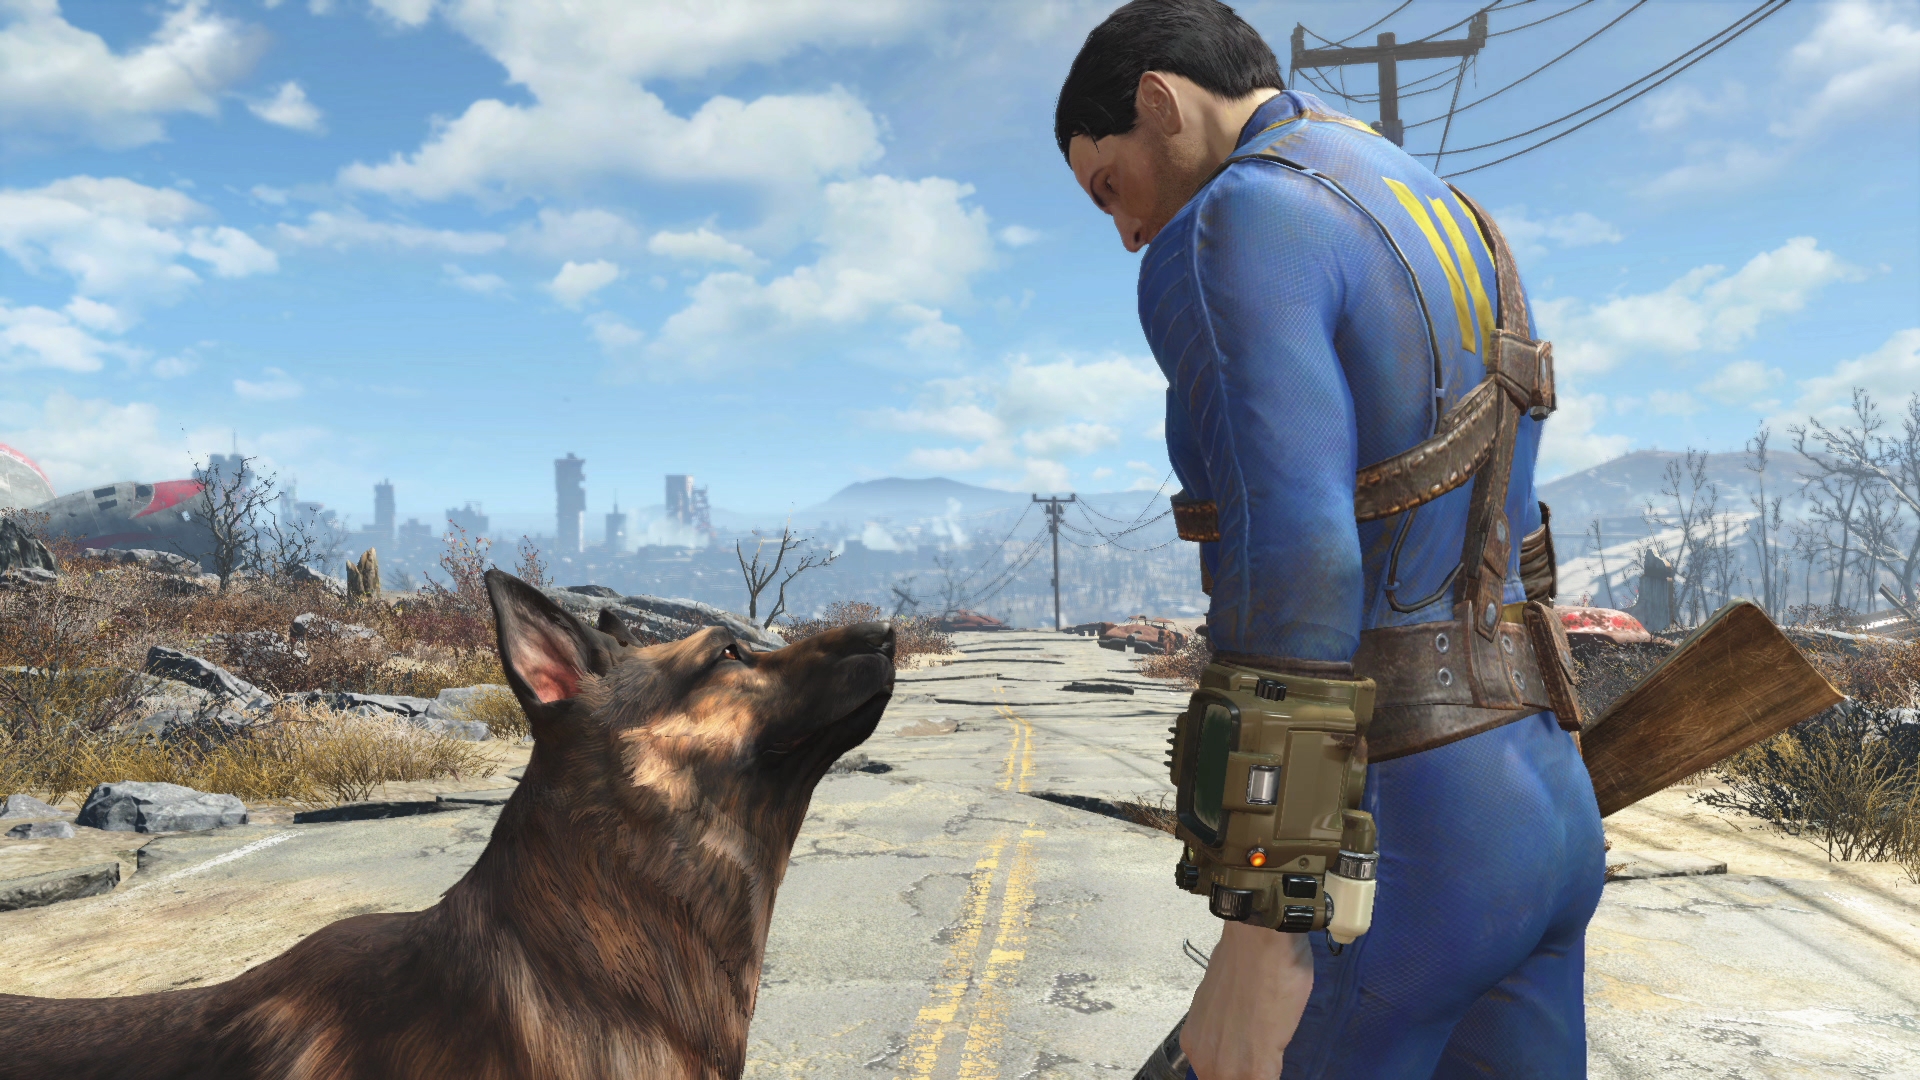 Debut Fallout 4 Screenshots Revealed, Listed for a Potential 2015 Release